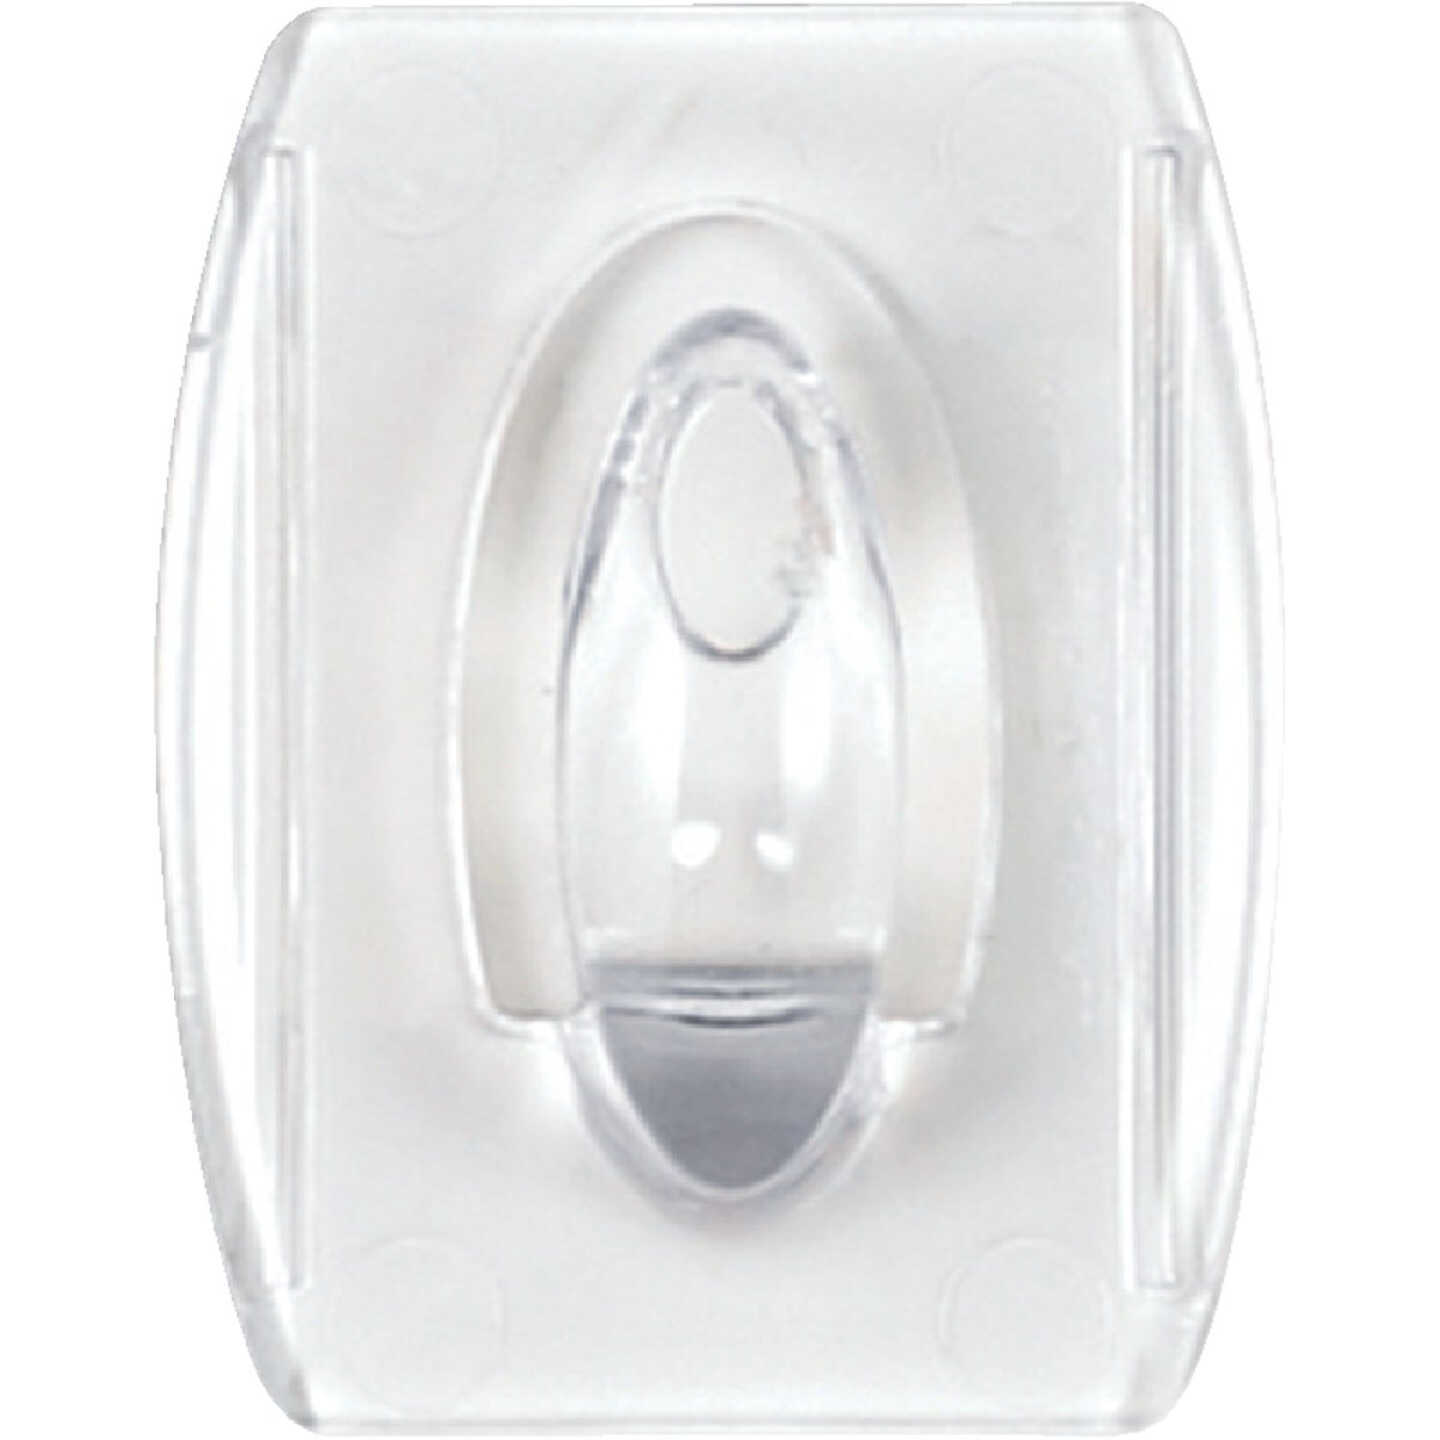 Command? Outdoor Large Clear Window Hook, 1 Hook, 2 Strips/Pack